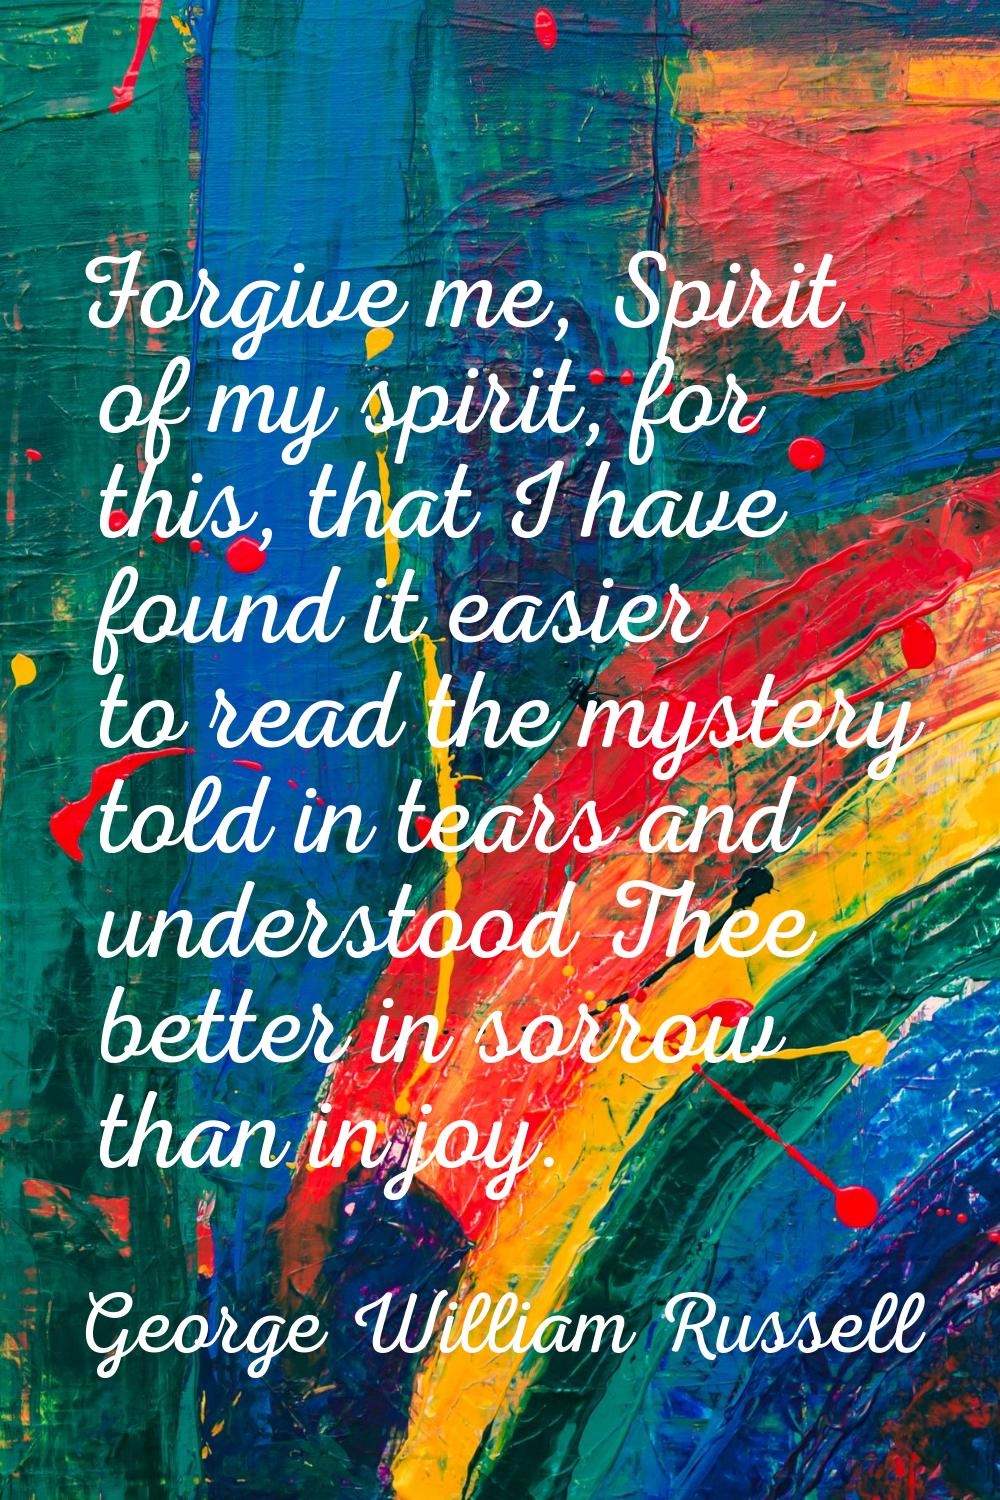 Forgive me, Spirit of my spirit, for this, that I have found it easier to read the mystery told in 